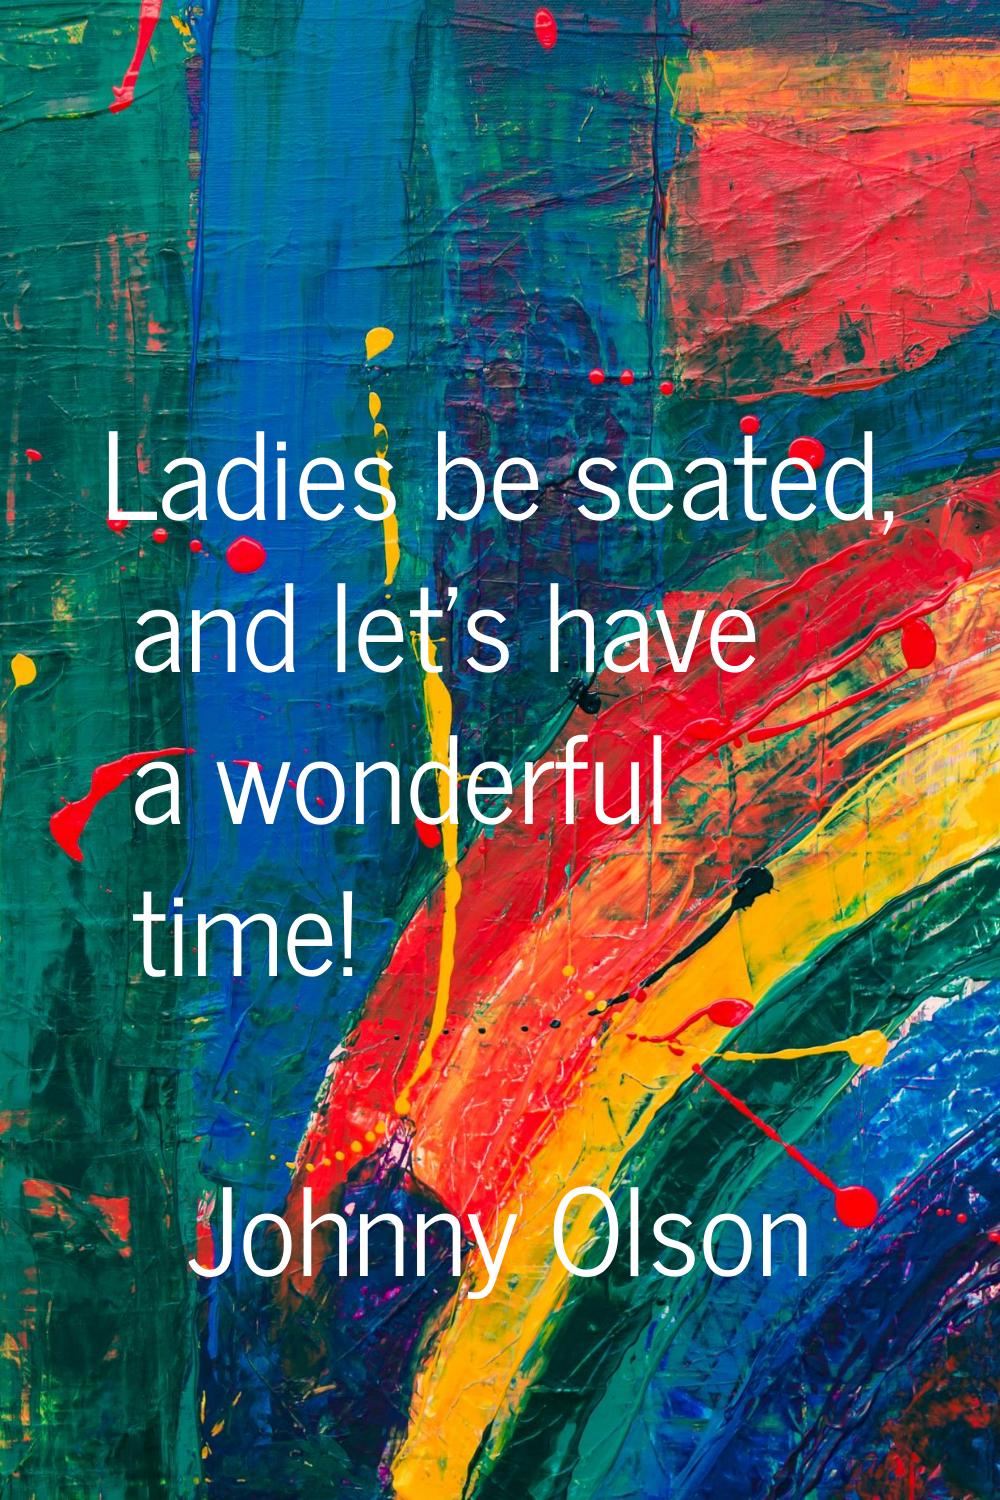 Ladies be seated, and let's have a wonderful time!